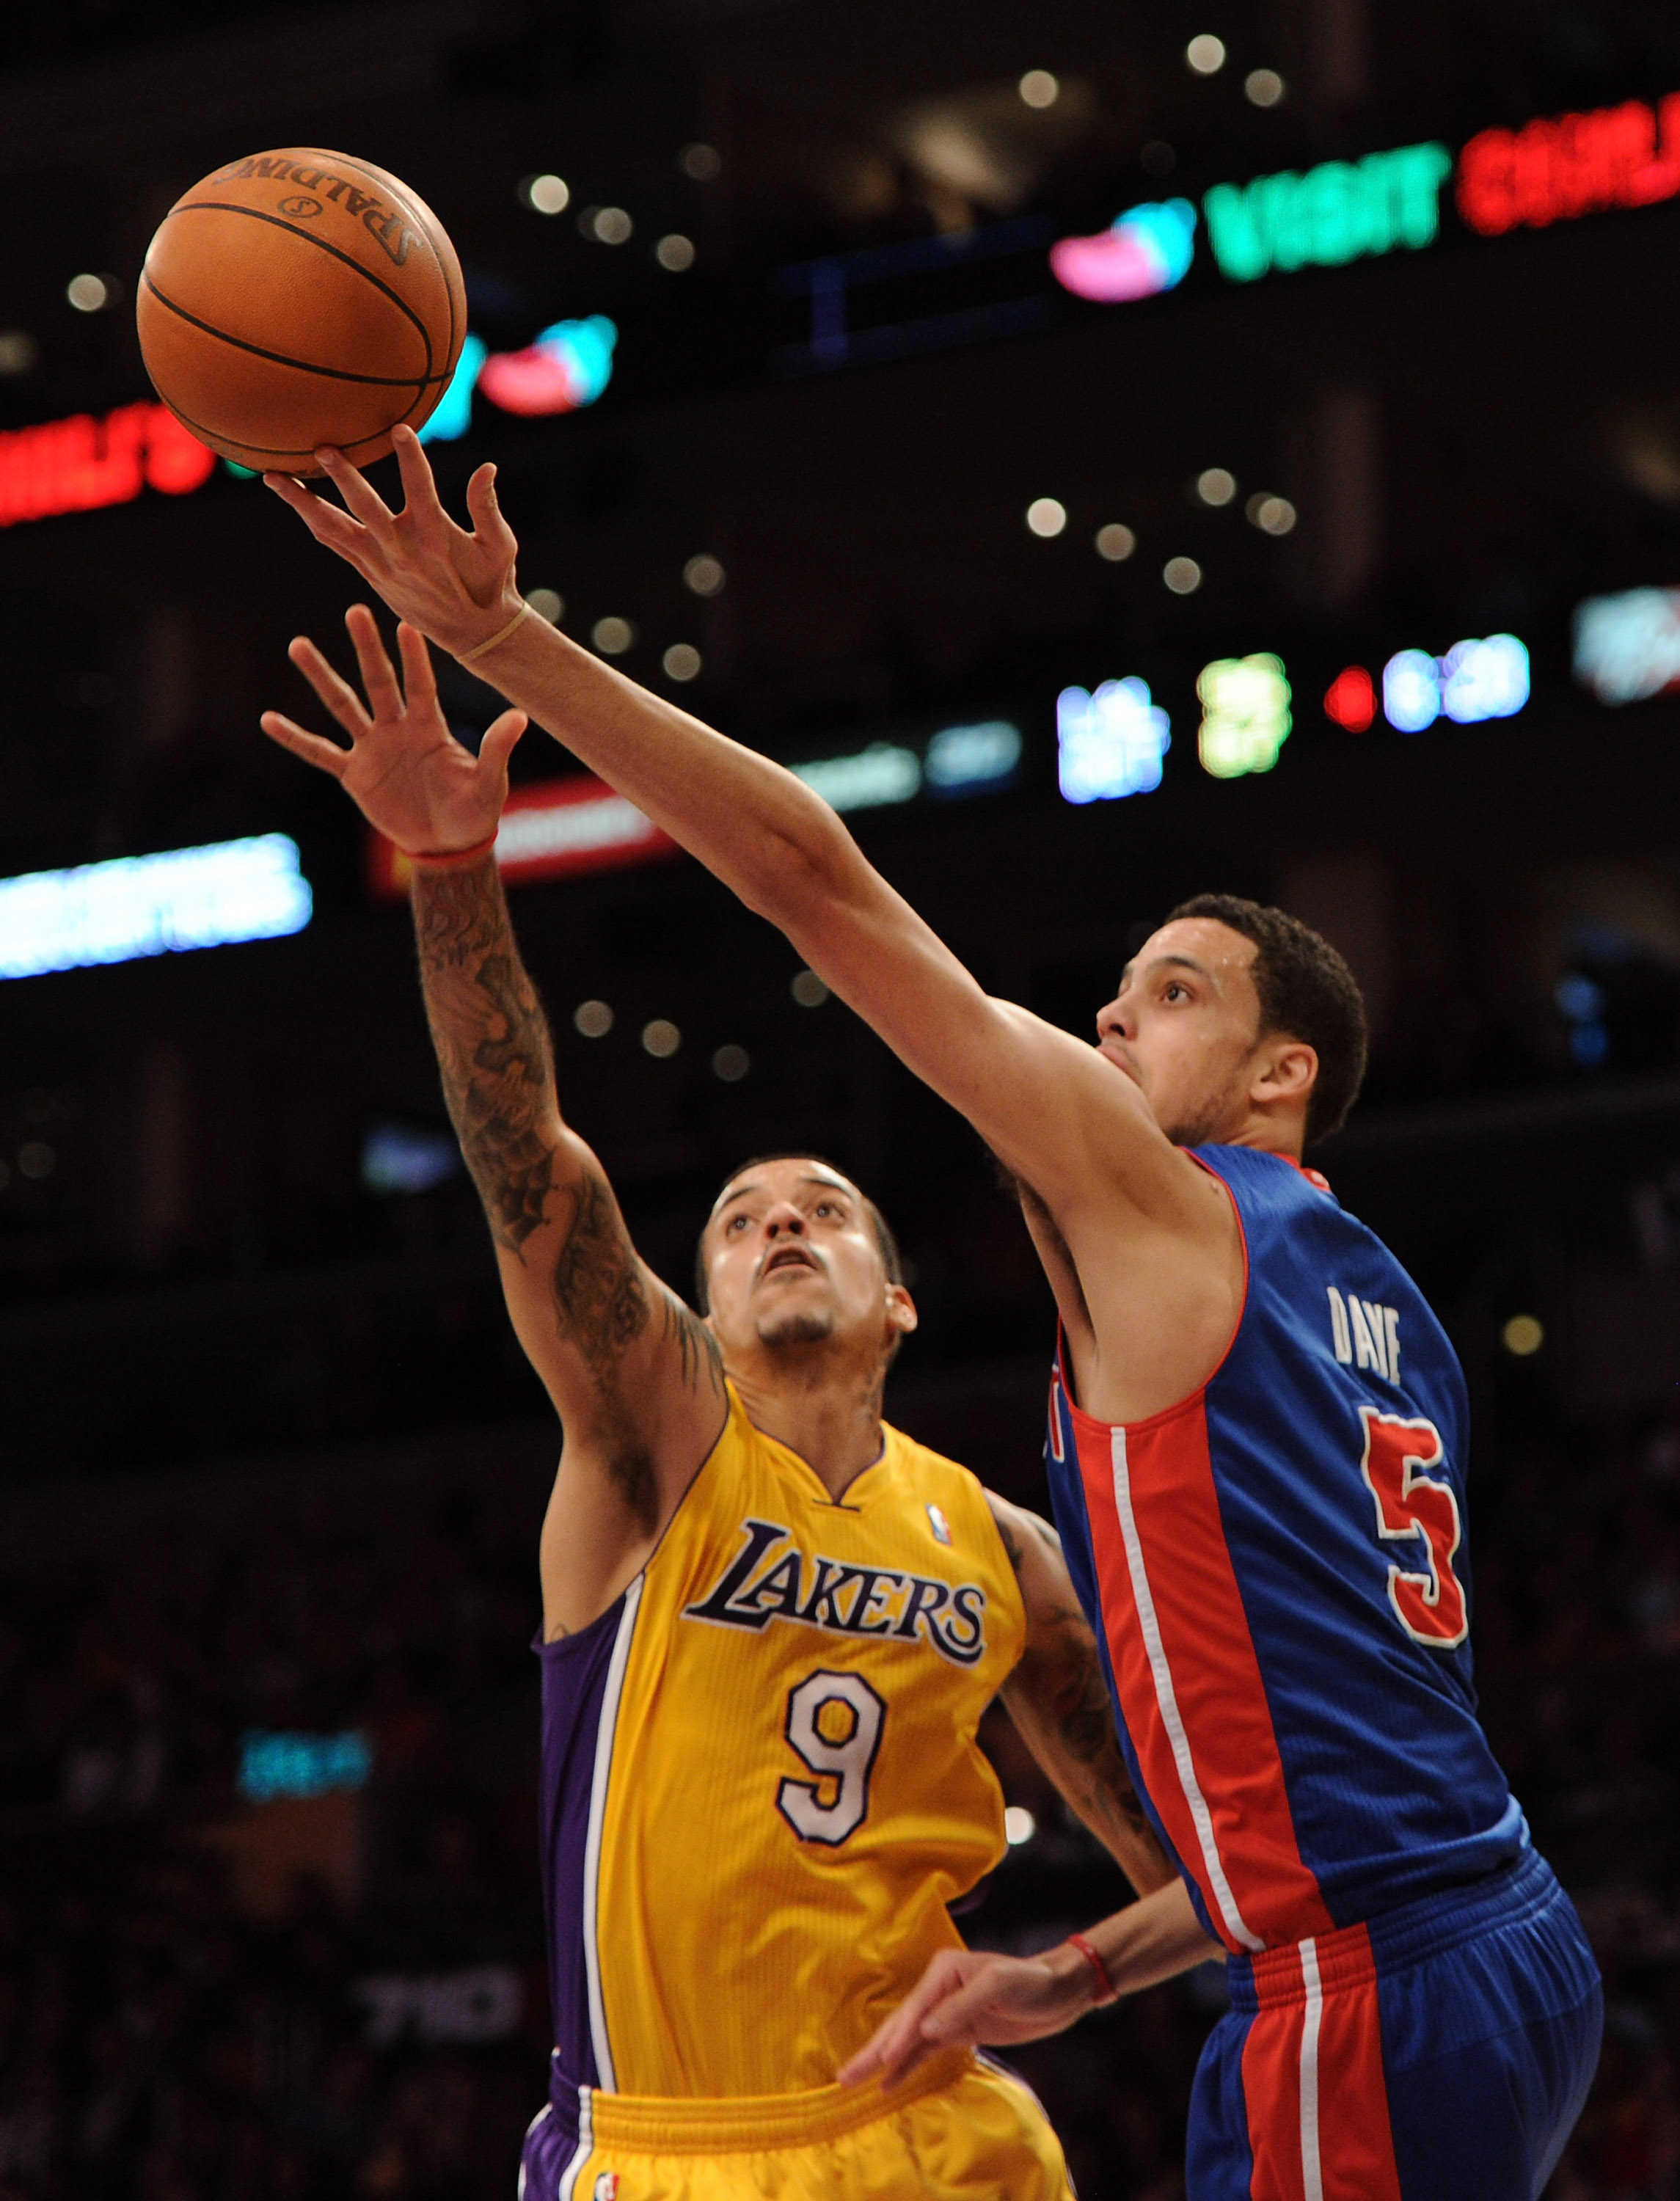 LOS ANGELES, CA - JANUARY 04:  Austin Daye #5 of the Detroit Pistons goes for a layup in front of Matt Barnes #9 of the Los Angeles Lakers during a 108-83 Laker win at the Staples Center on January 4, 2011 in Los Angeles, California. NOTE TO USER: User ex